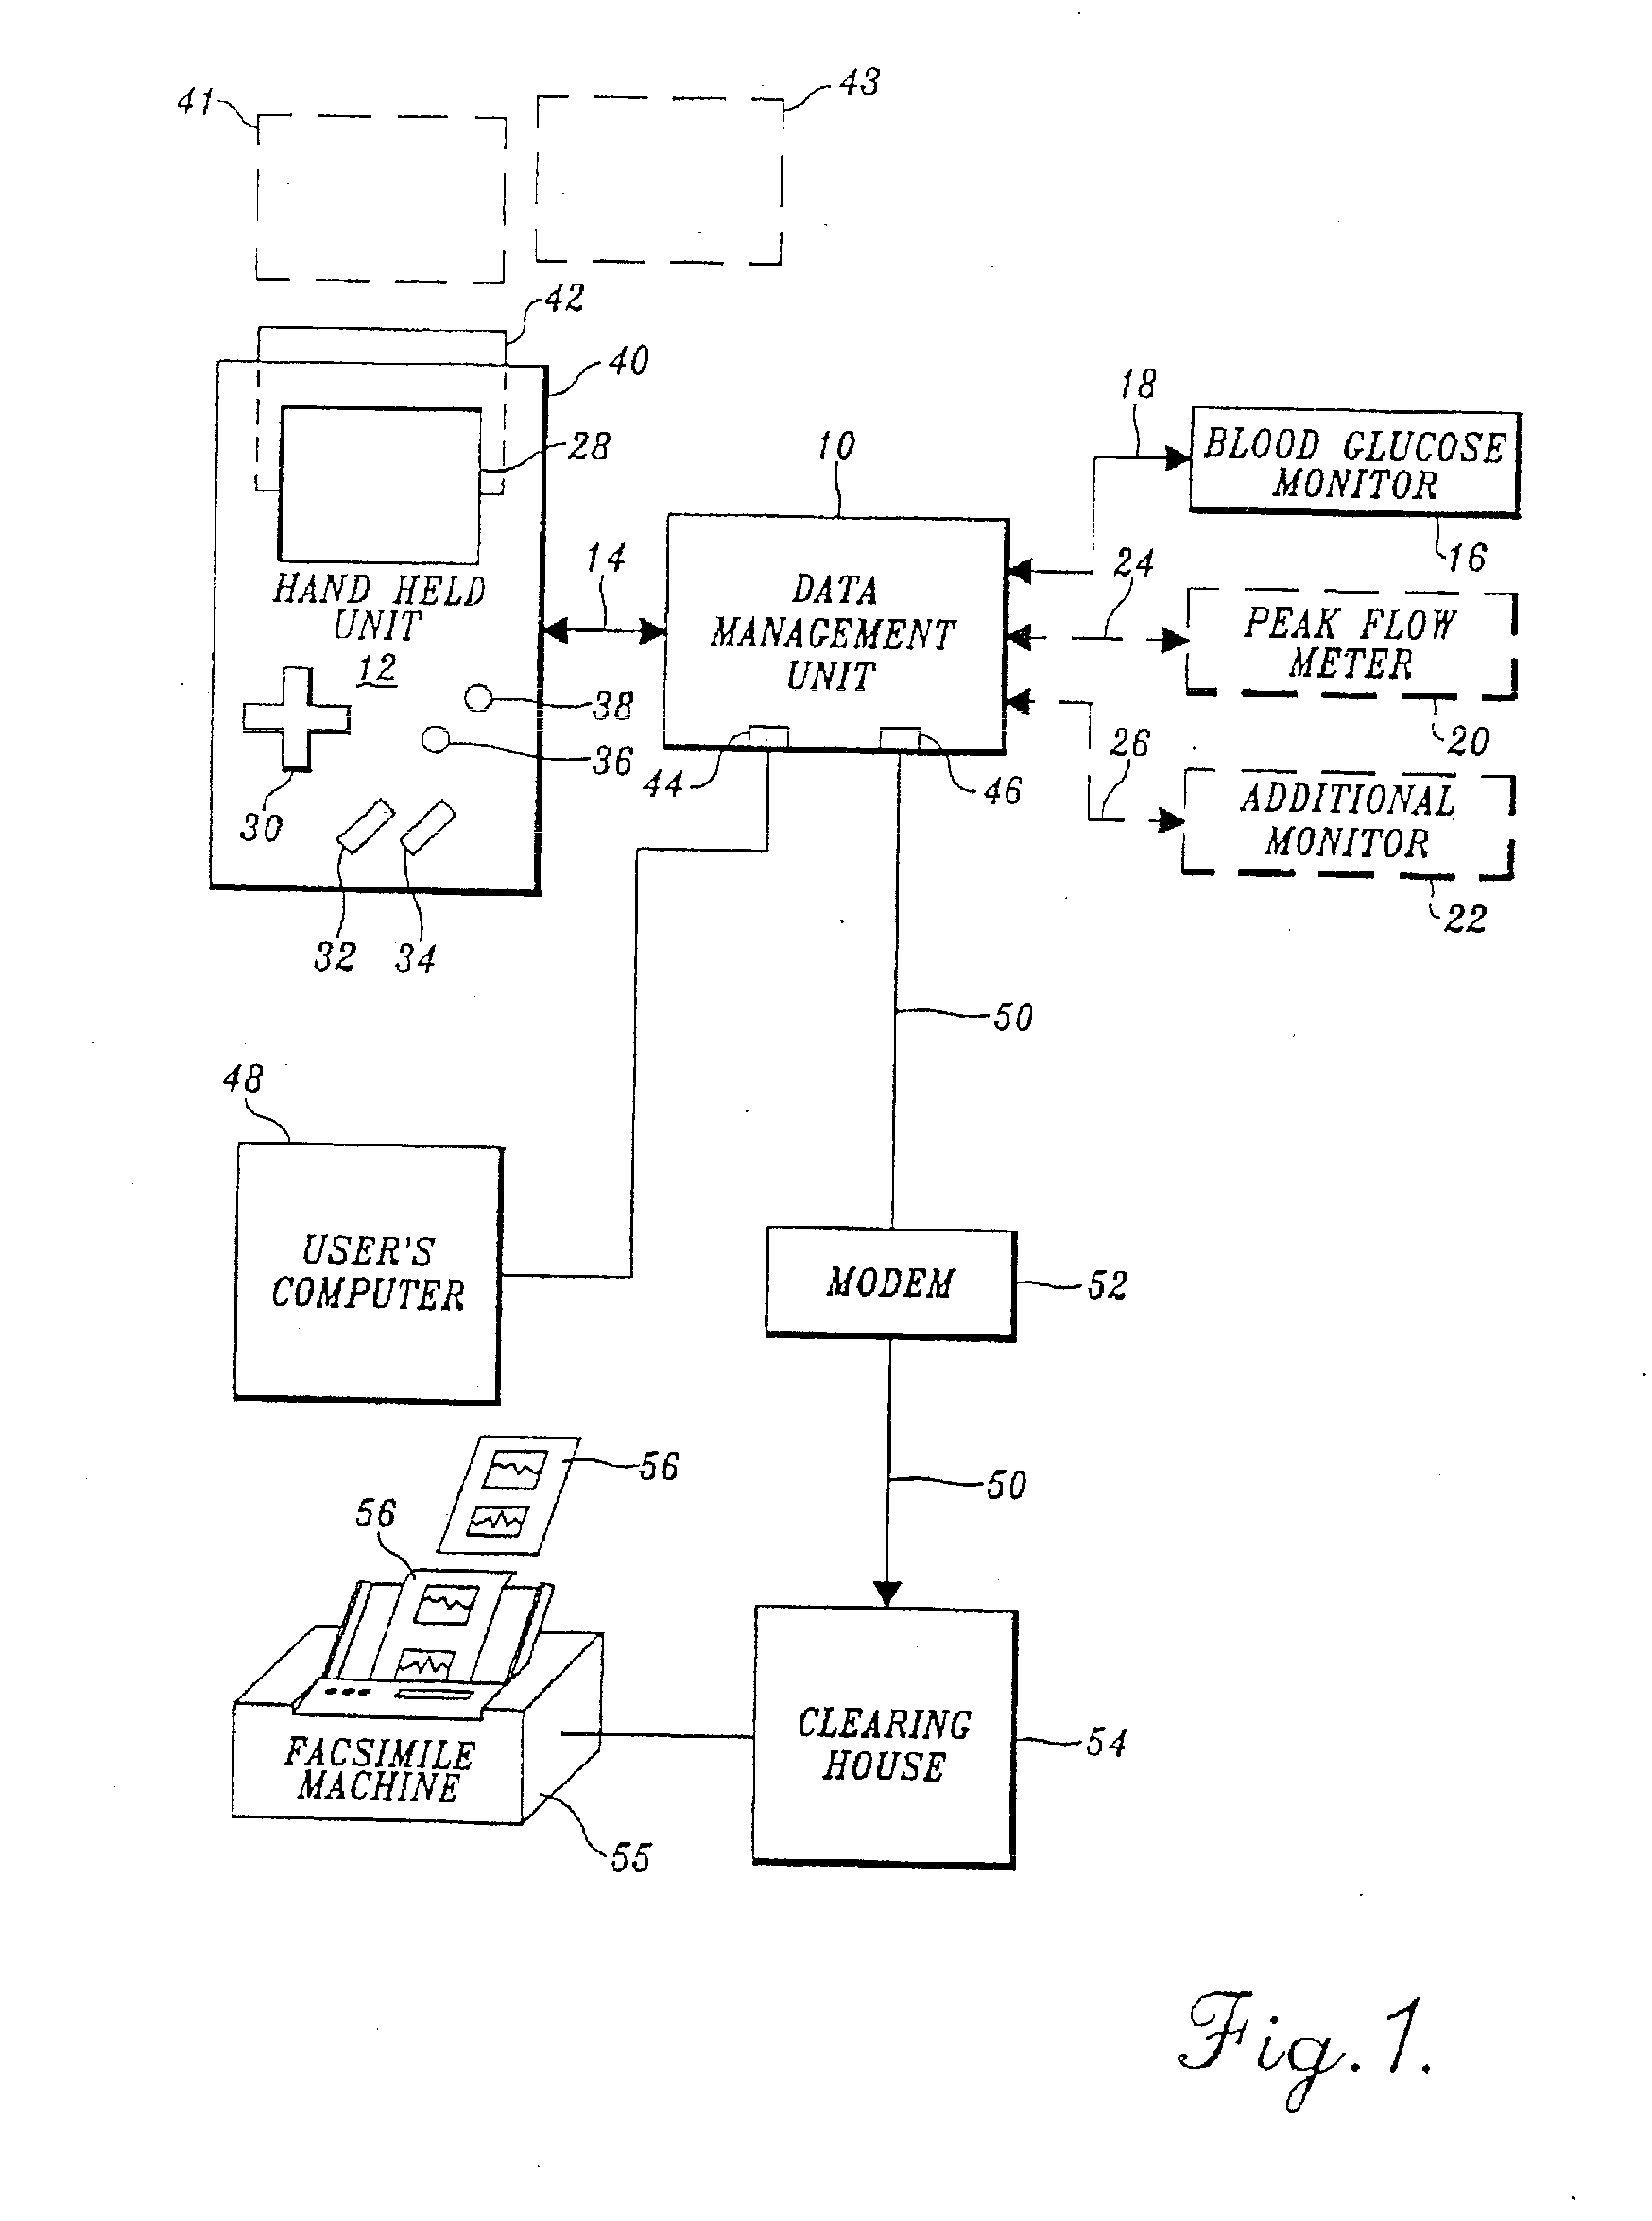 Method and apparatus for remote health monitoring and providing health related information